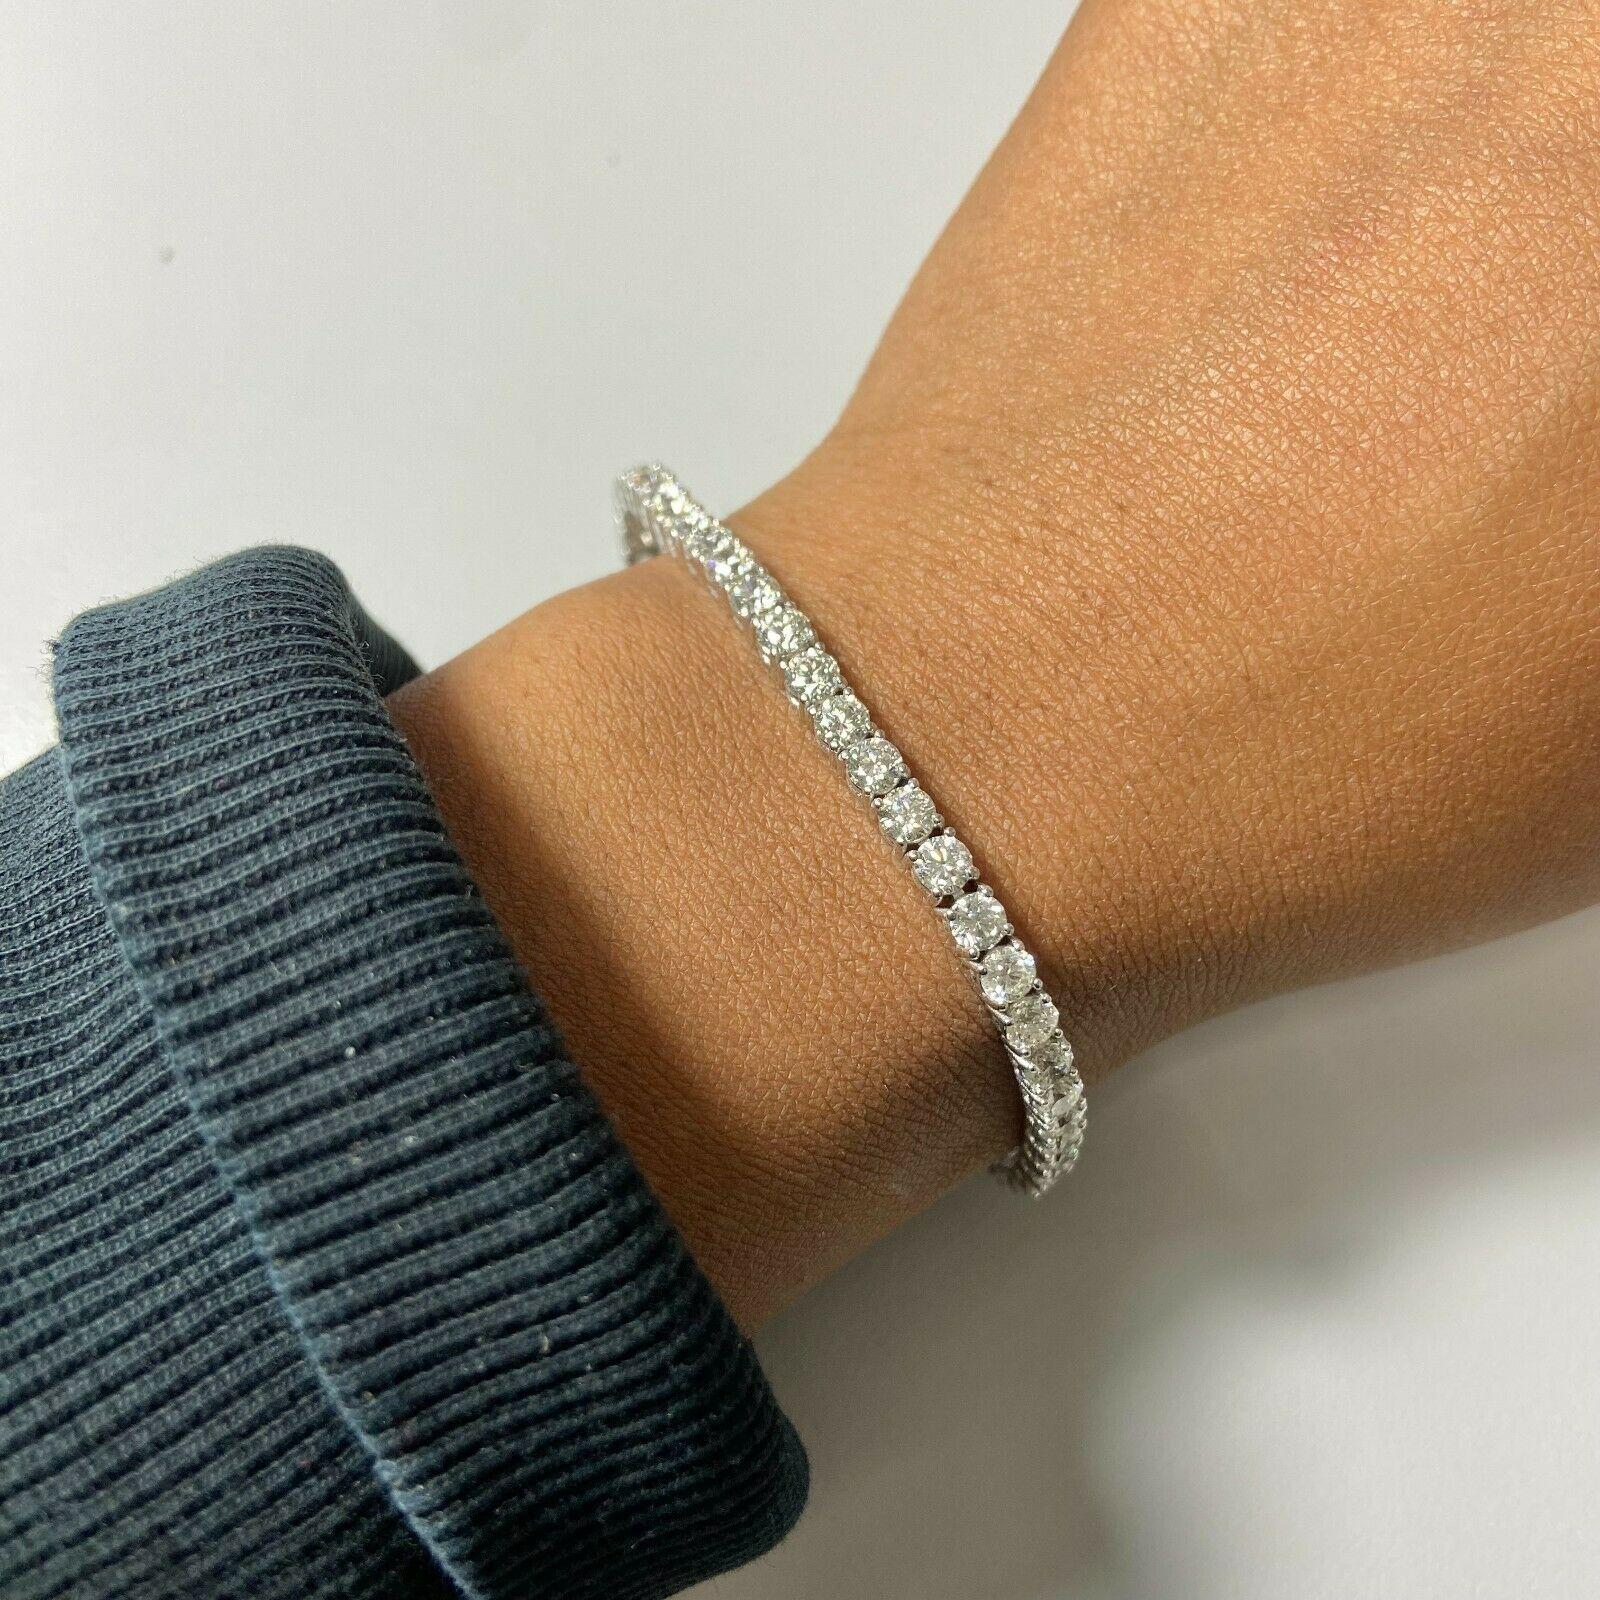 Specifications:
    main stone:ROUND DIAMONDS
    diamonds:47 PCS
    carat total weight:approximately 8.67 CTW
    color:H
    clarity:VS
    brand:CUSTOM MADE
    metal:14K WHITE gold
    type:BRACELET
    weight:9.30 gr
    LENGHT:7 INCH
   